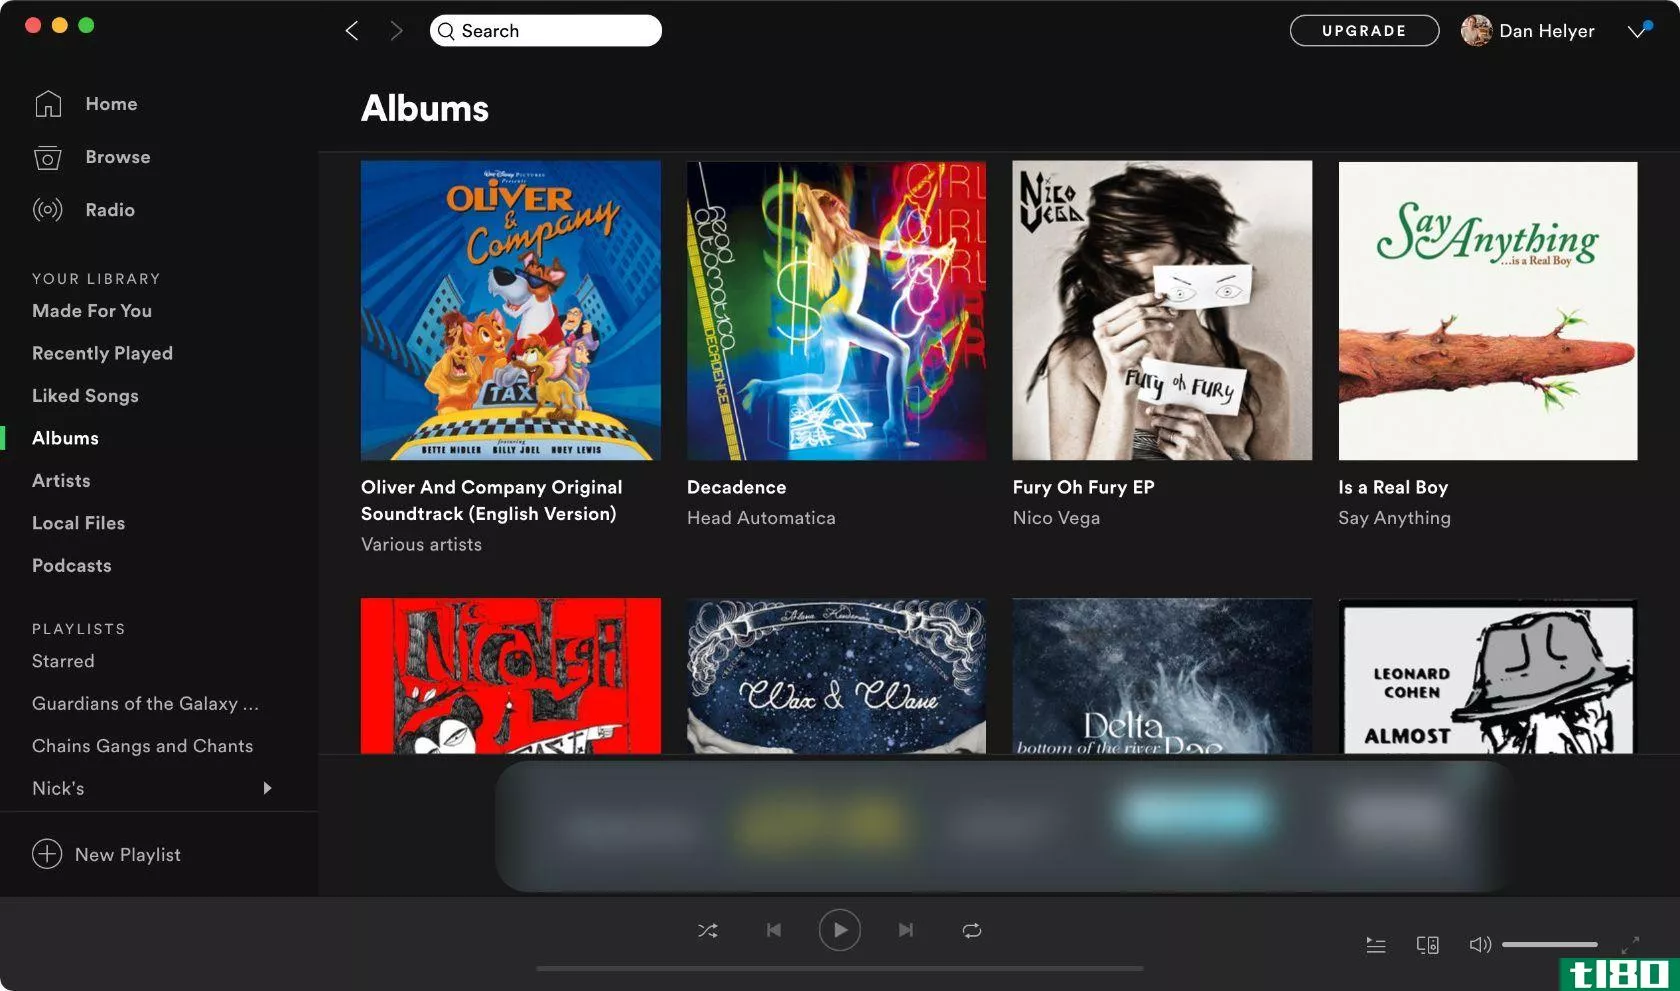 Spotify music library showing albums